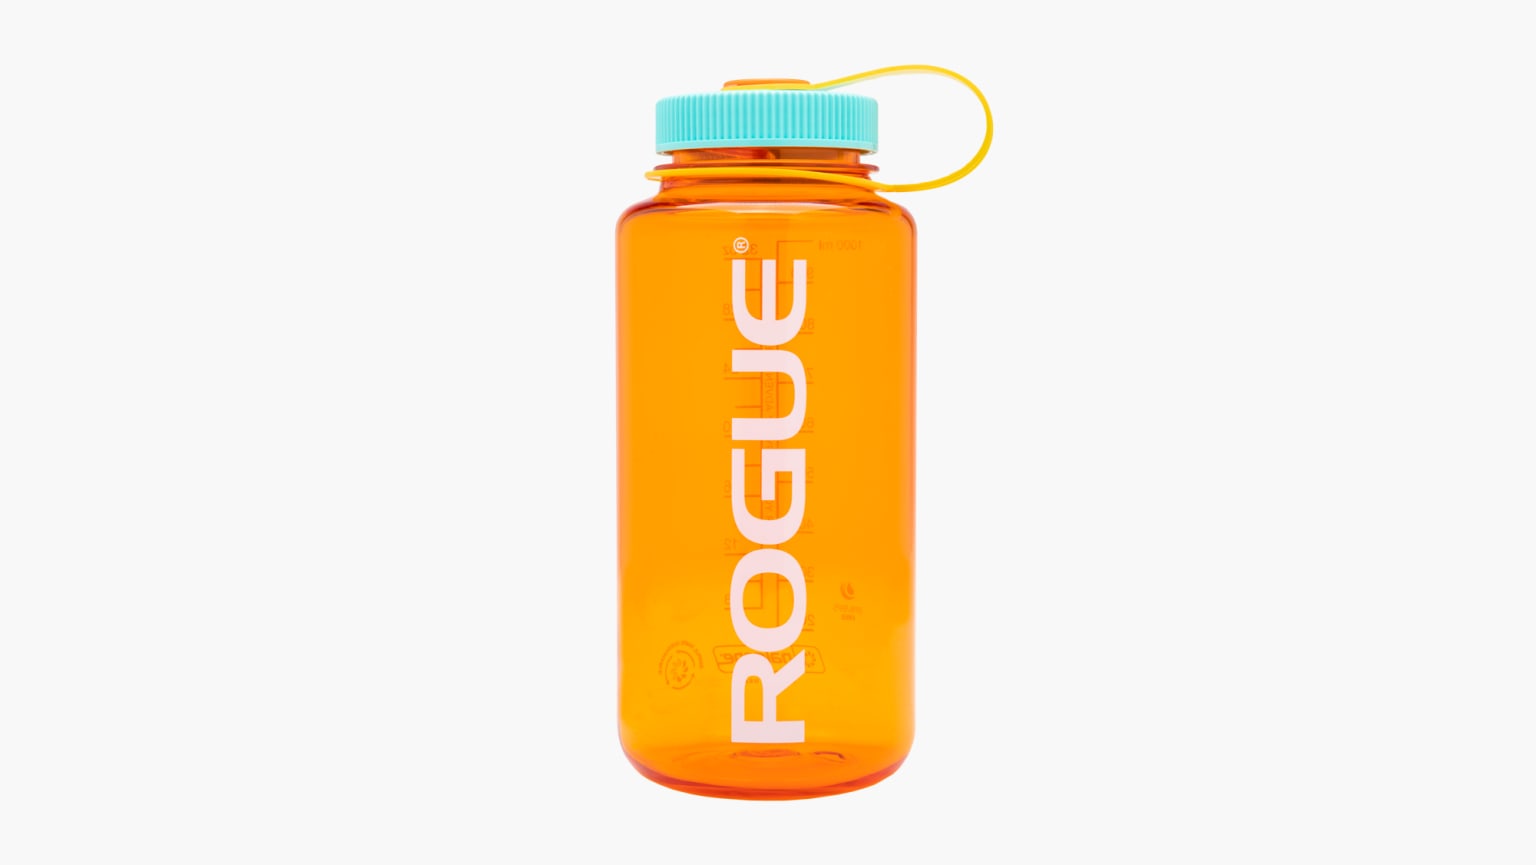 https://assets.roguefitness.com/f_auto,q_auto,c_limit,w_1536,b_rgb:f8f8f8/catalog/Gear%20and%20Accessories/Accessories/Shakers%20and%20Bottles/NL0013/NL0013-H_usq0yt.png